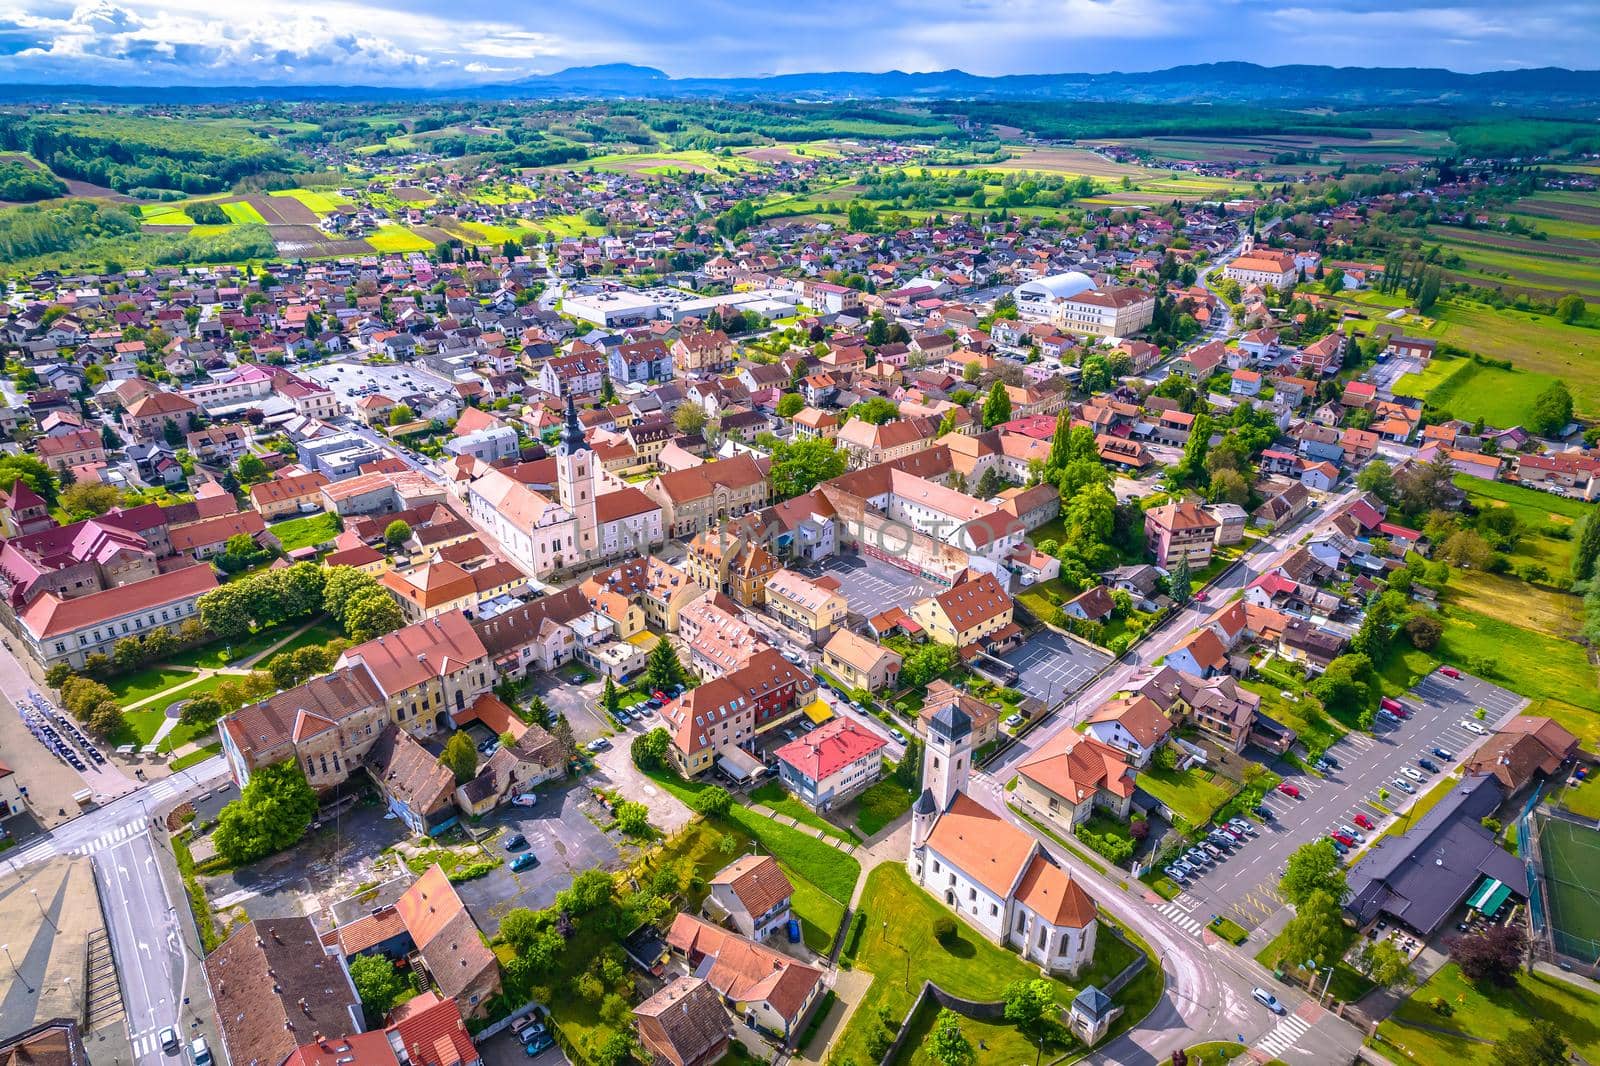 Picturesque town of Krizevci in Prigorje region aerial view, northern Croatia